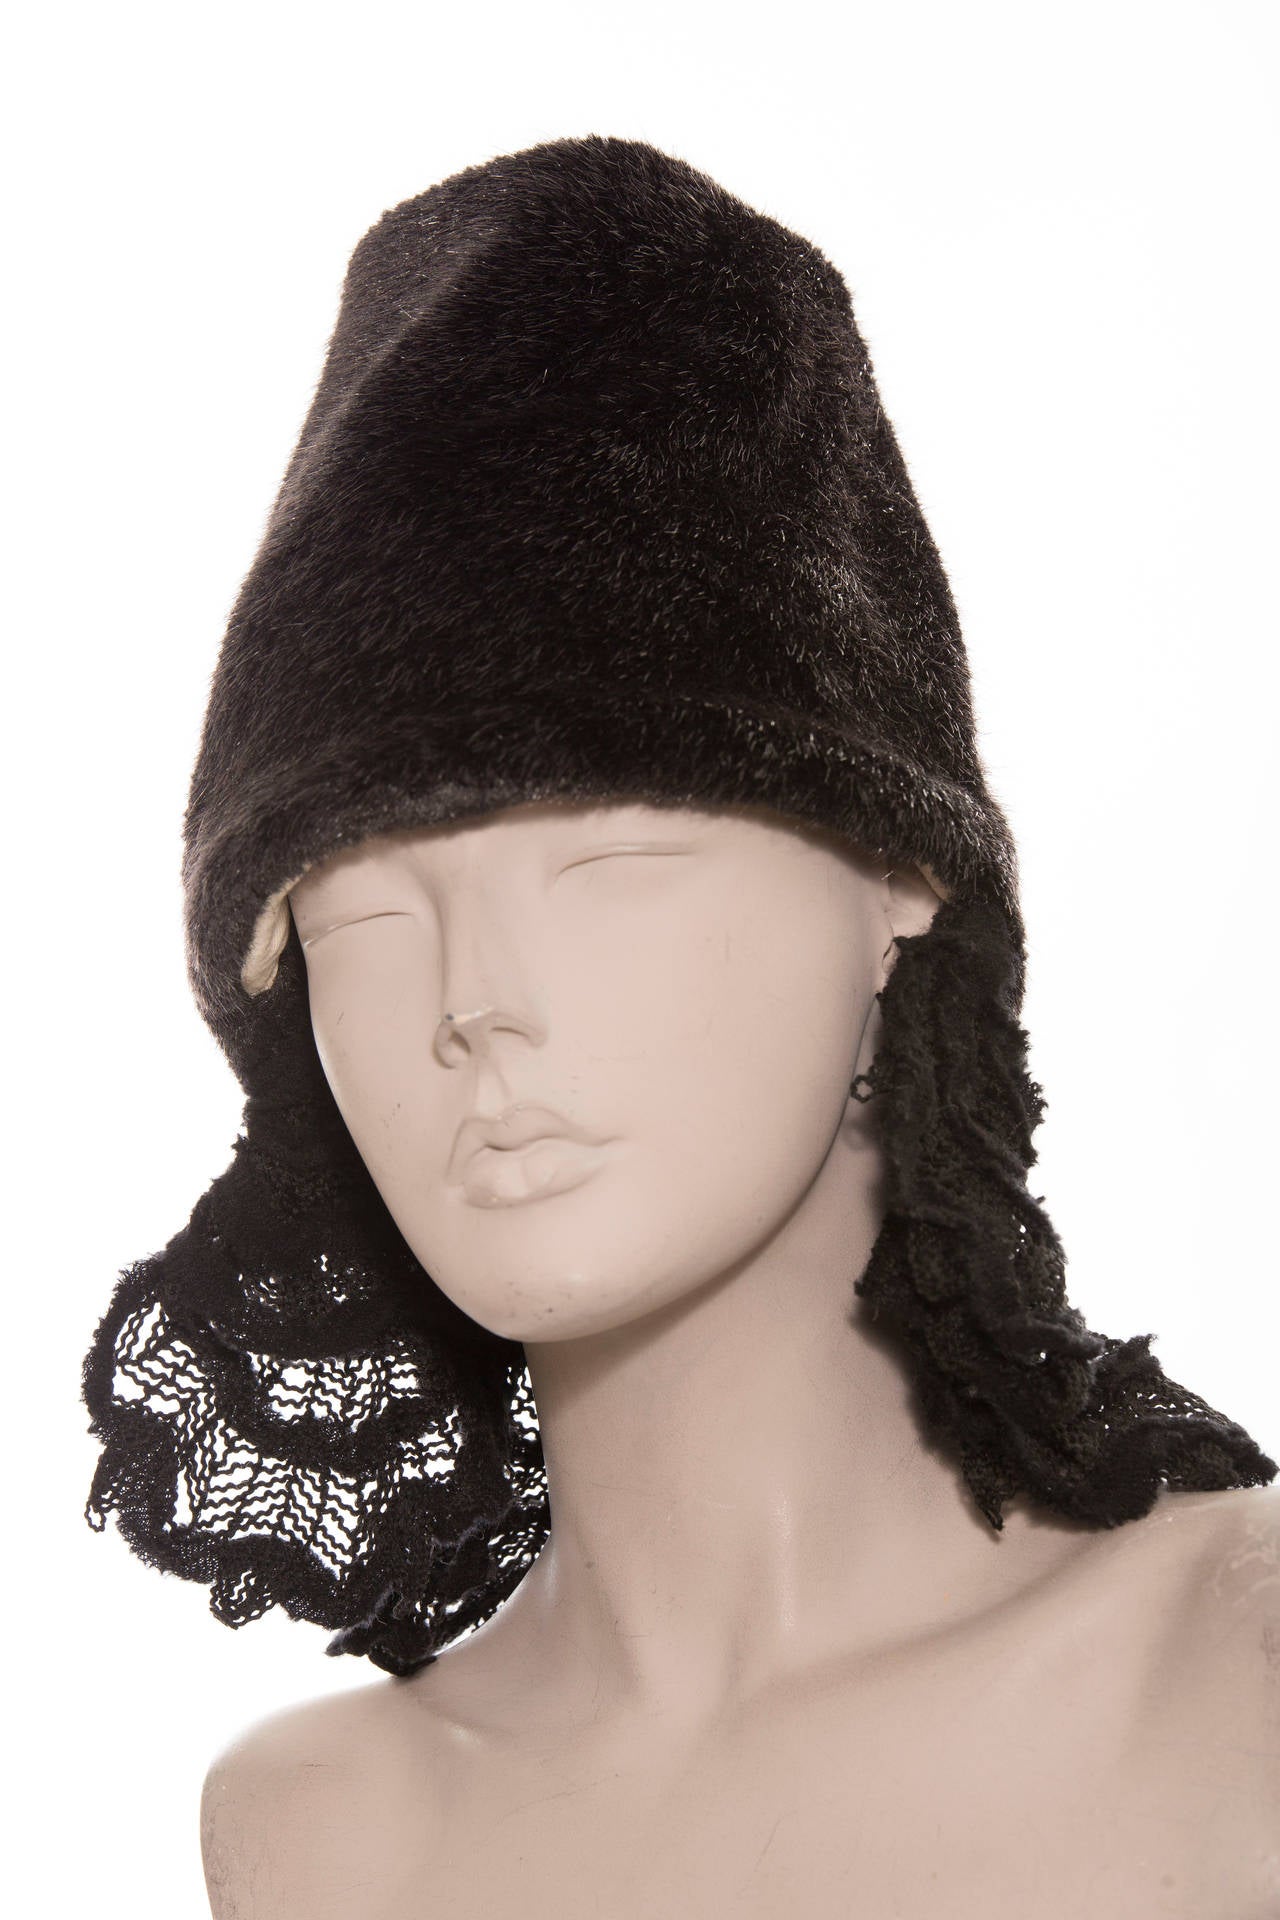 Comme des Garçons black faux fur hat with open top and hanging crochet accent at trim.

Circumference: 23 inch